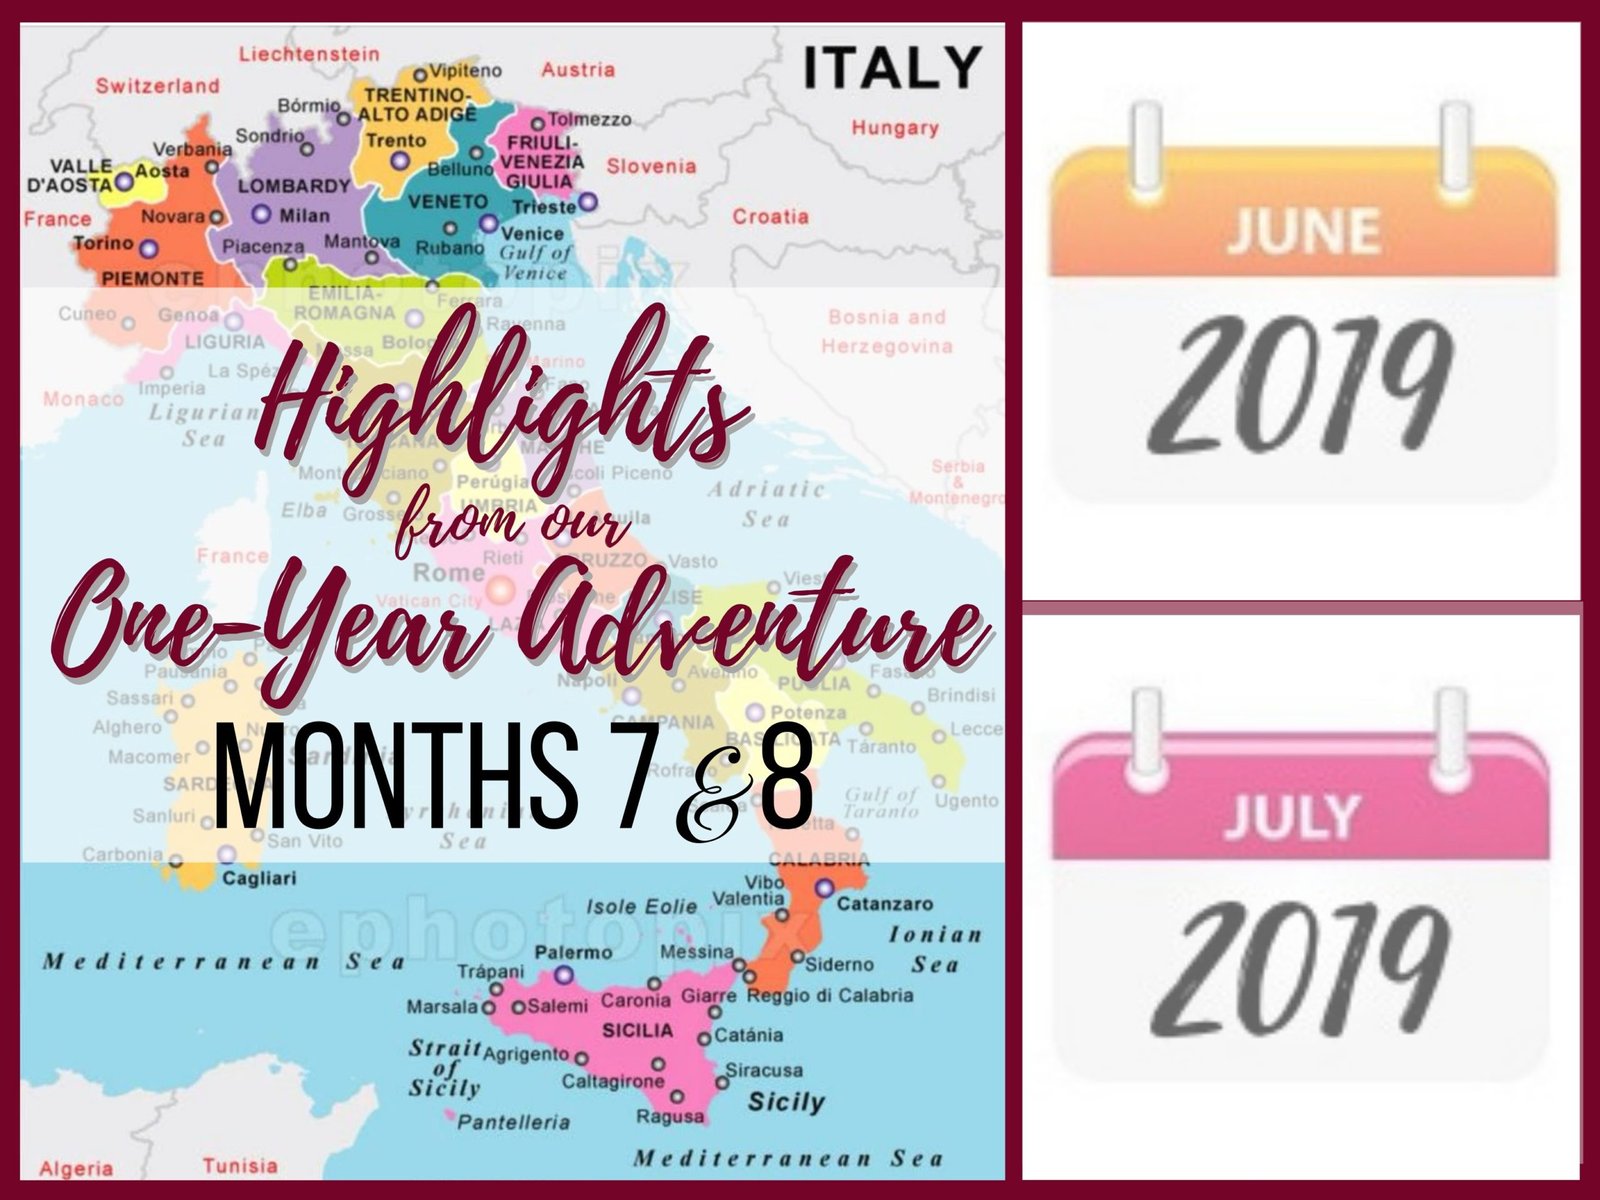 One year journey through Italy, Months 7&8, ouritalianjourney.com